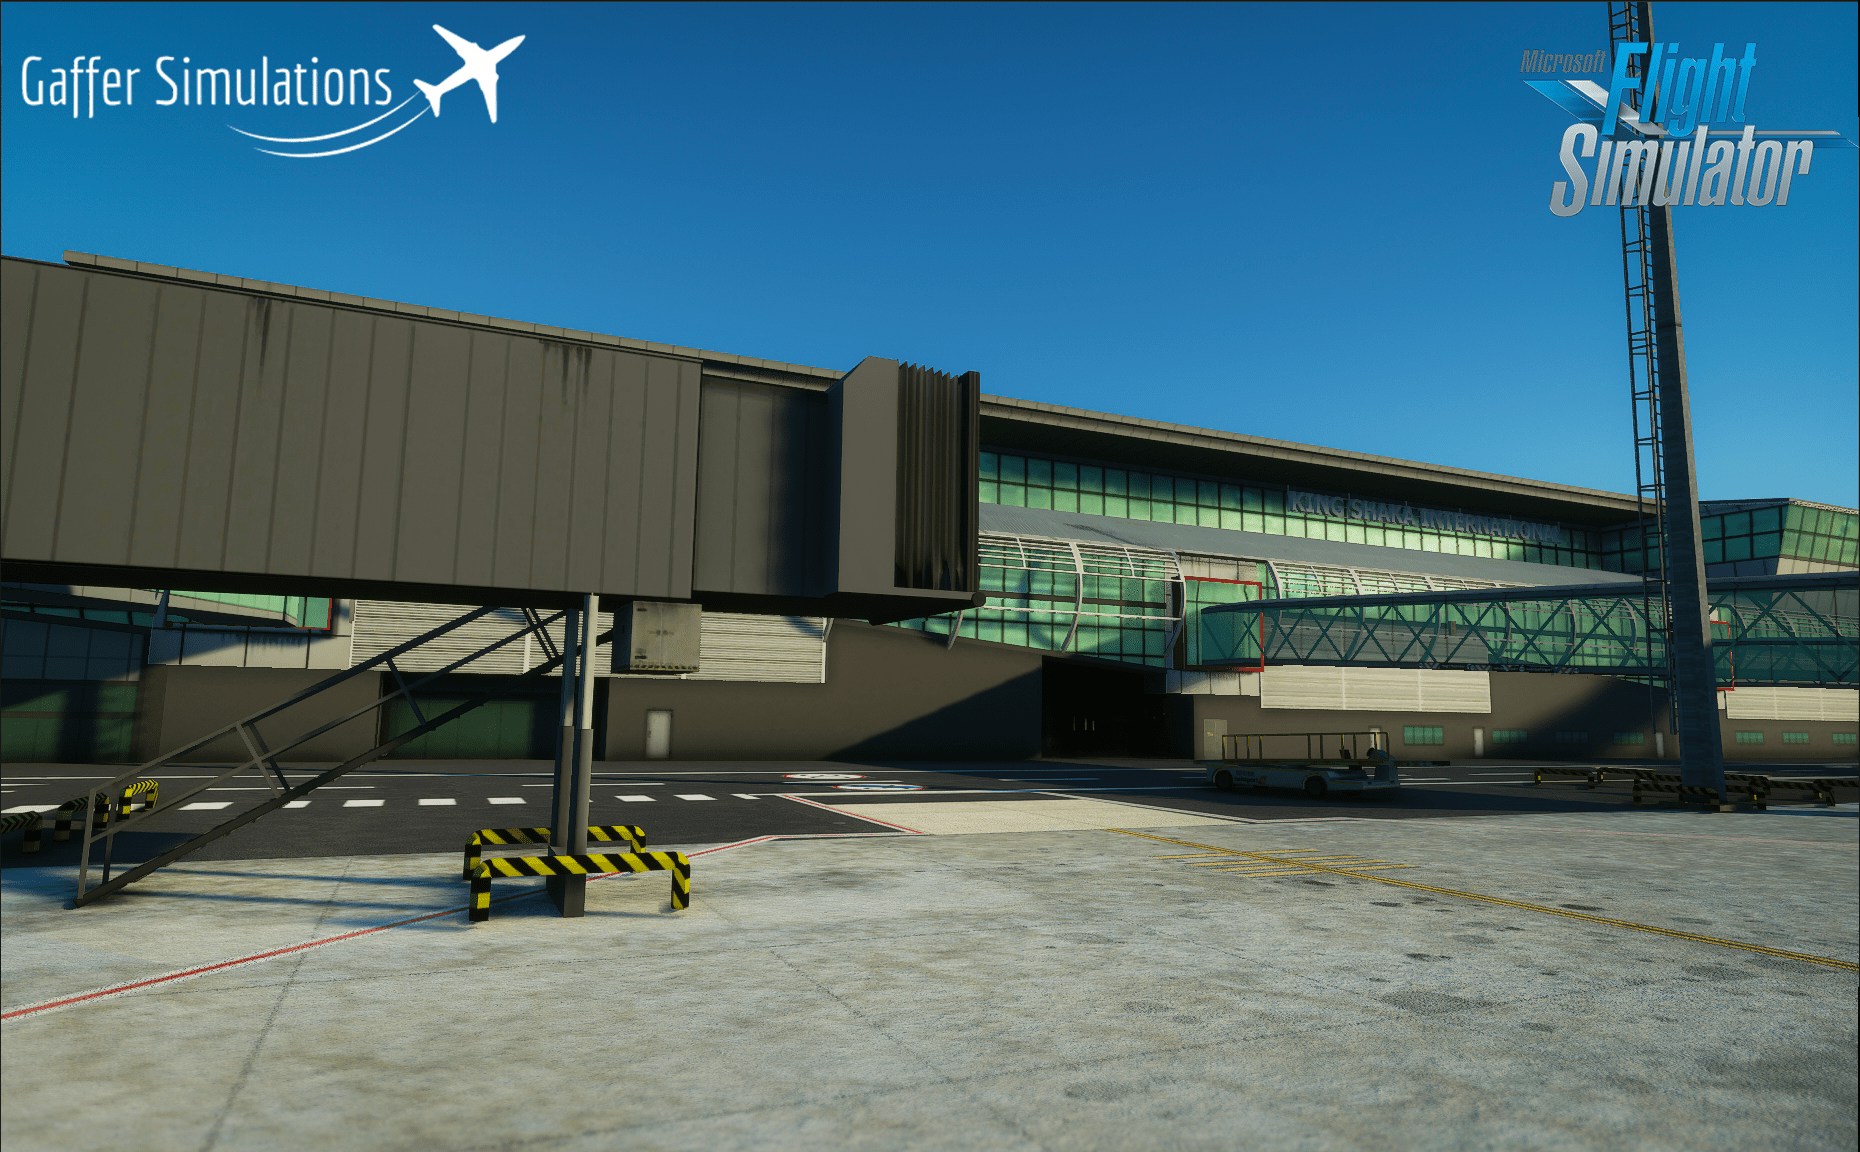 Aerosoft Releases Twin Otter Update to Address Sound Issues and More